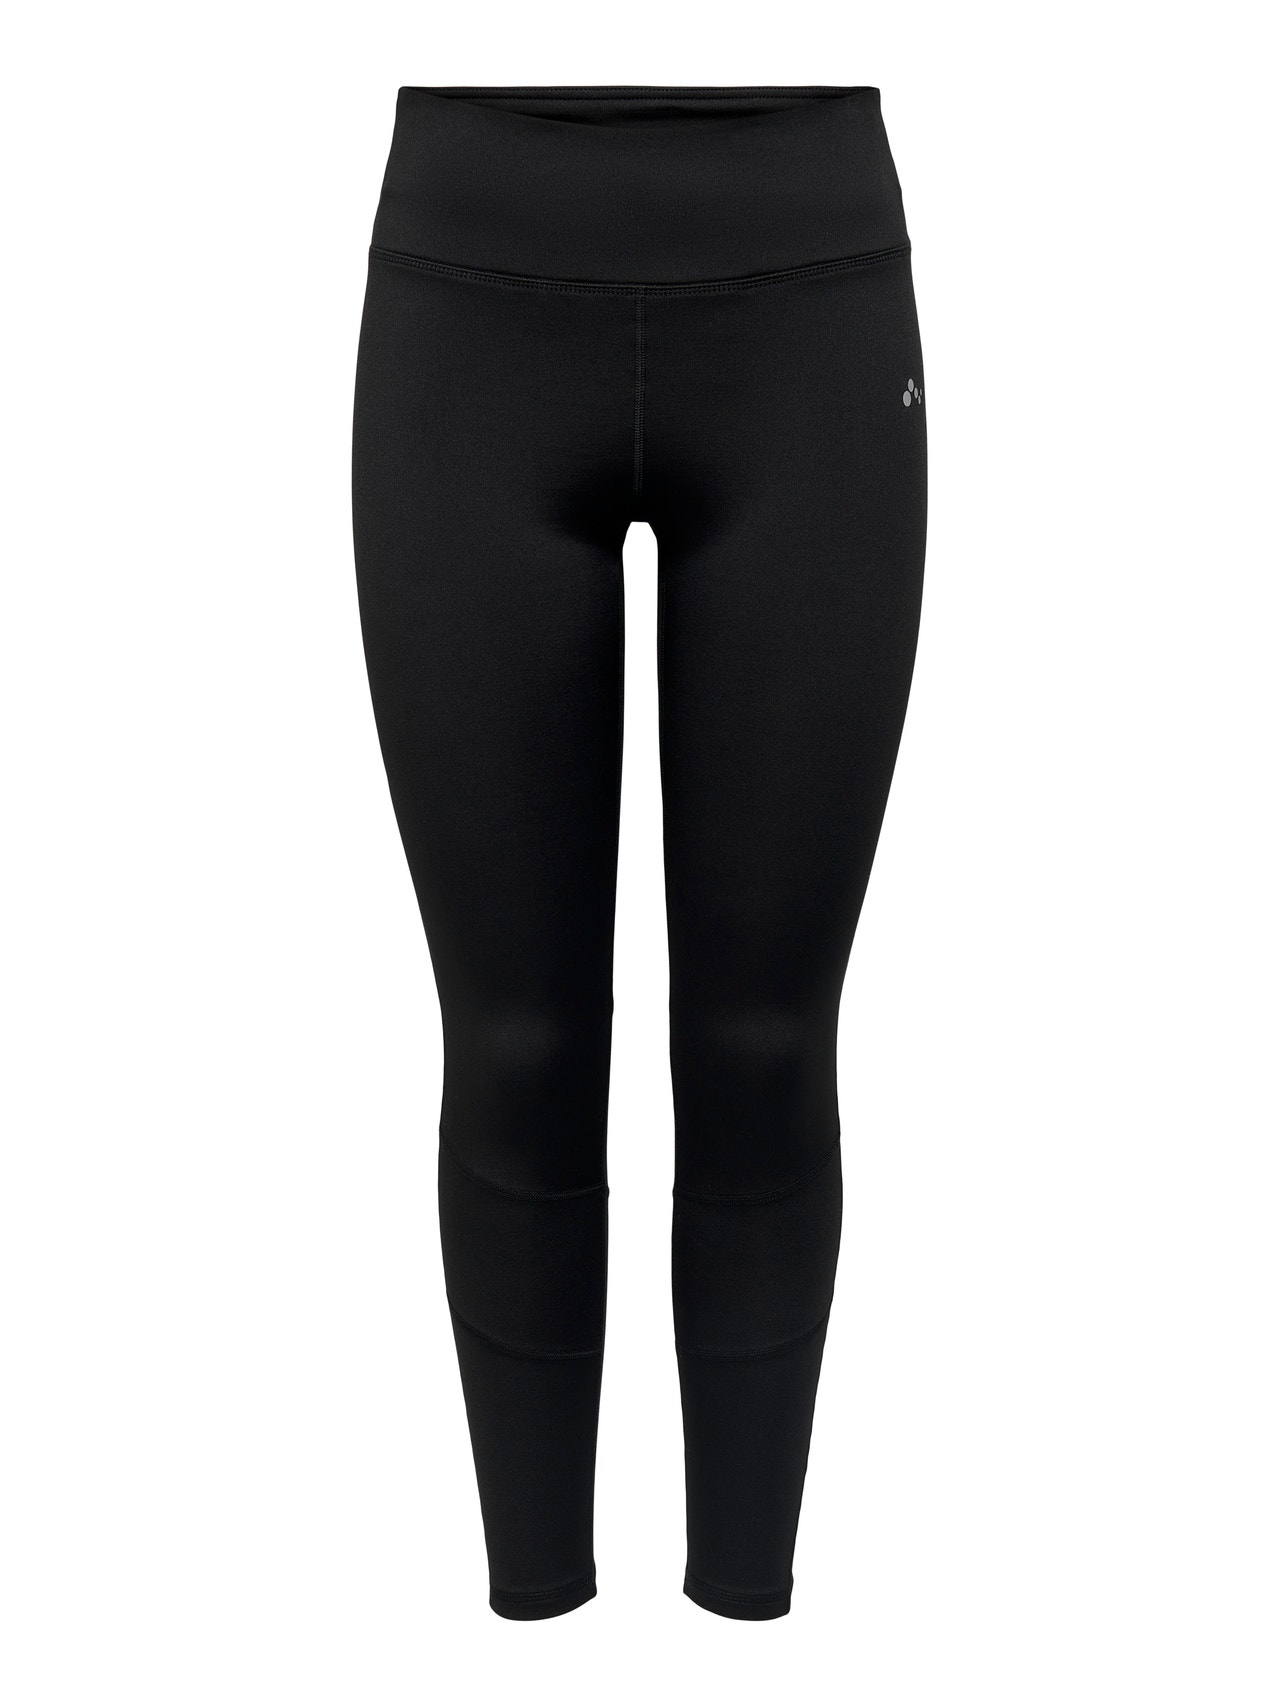 ONLY Tight Fit High waist Trousers -Black - 15273873